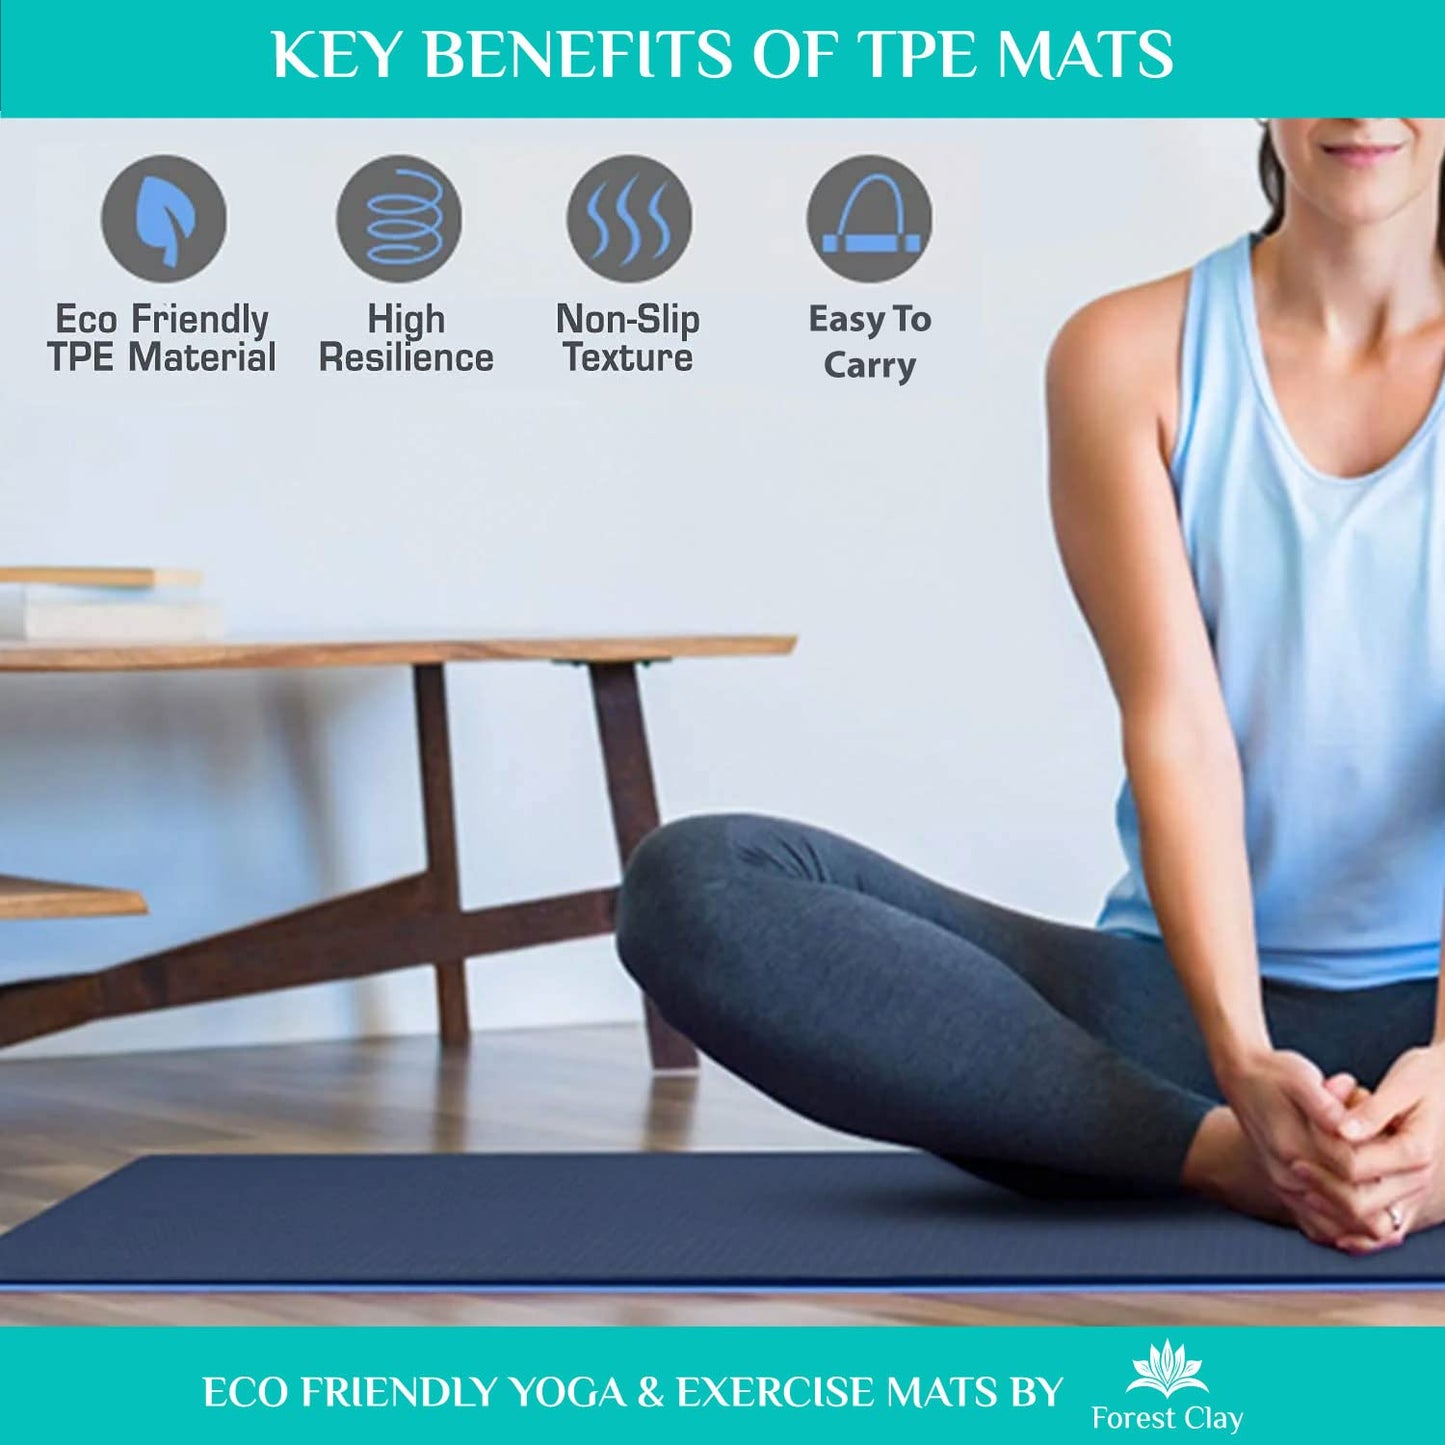 Forest Clay Premium 6mm TPE Material Non-Slip Yoga & Fitness Mat for All Types of Yoga, Pilates & Floor Workouts (72"L x 24"W x 6mm Thick)